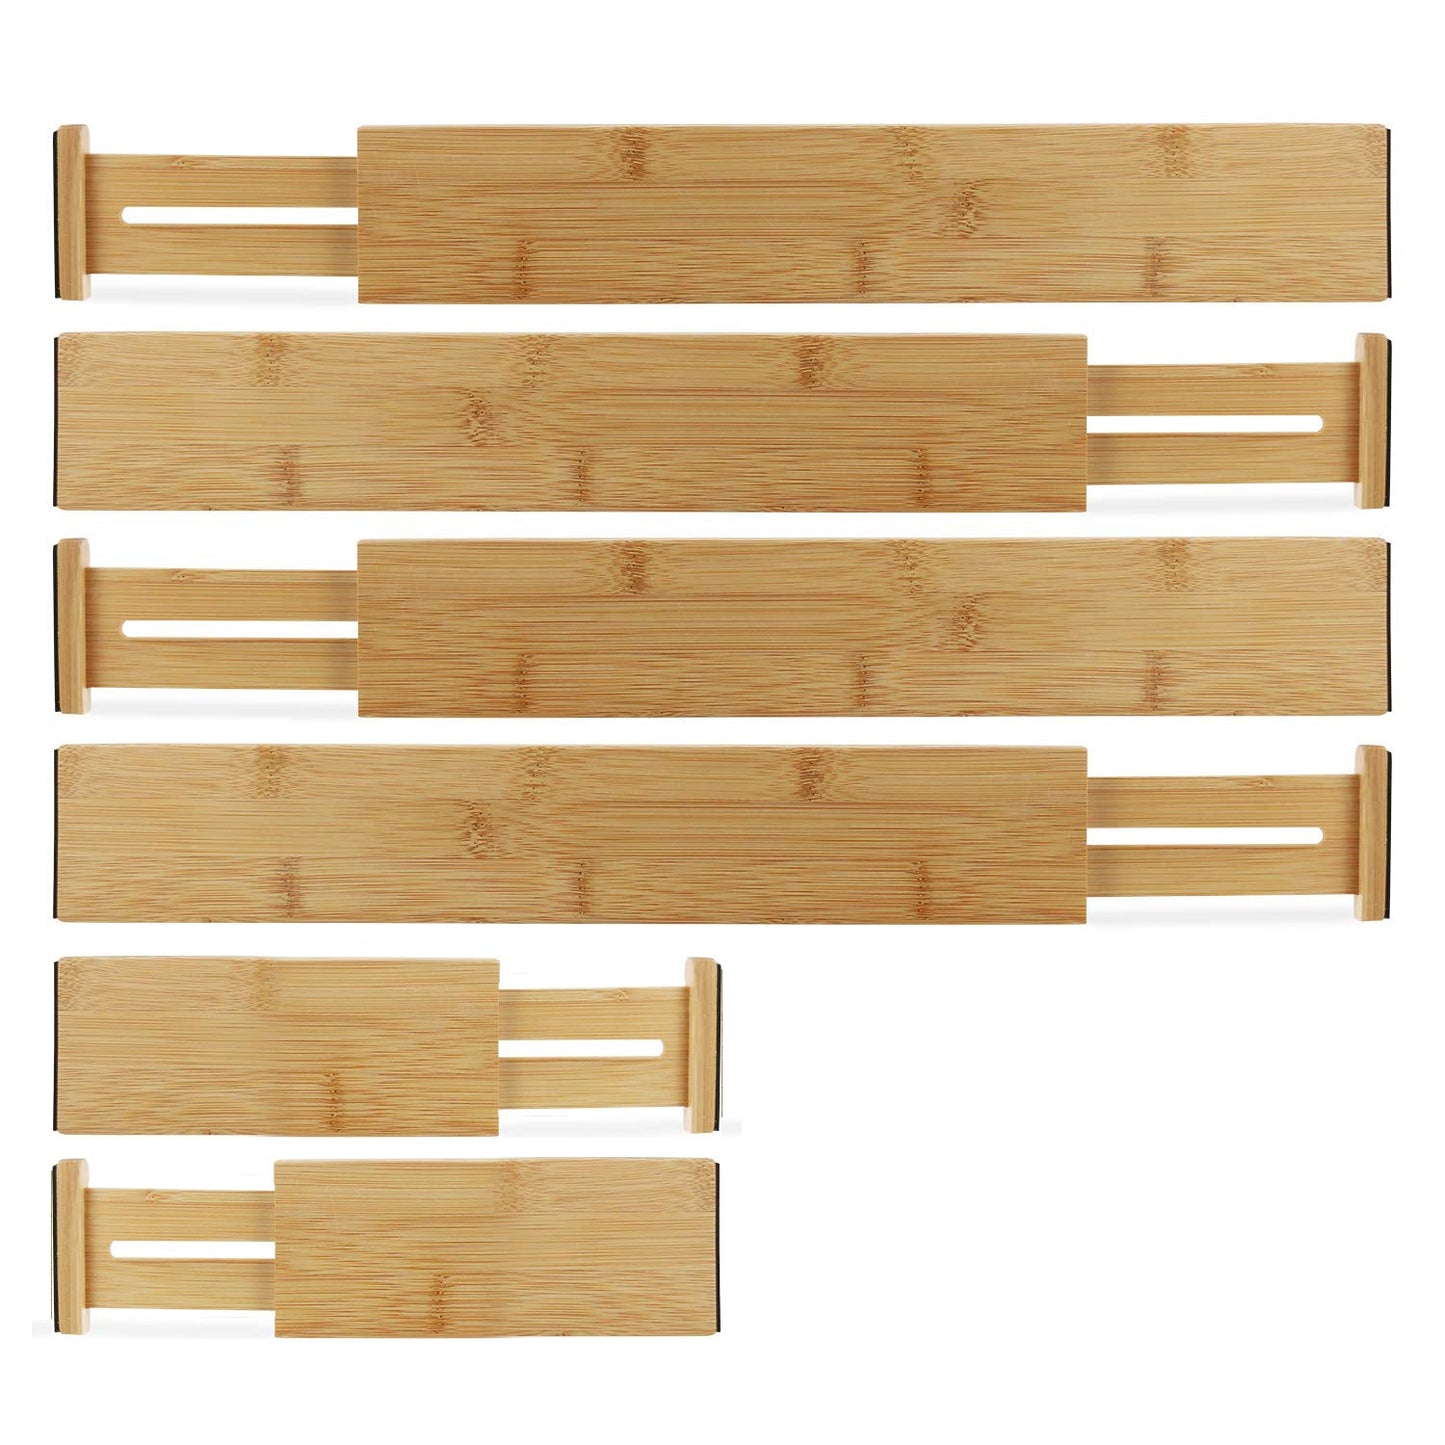 Bamboo Drawer Organizer Dividers, Adjustable, Set of 6 by ecozoi